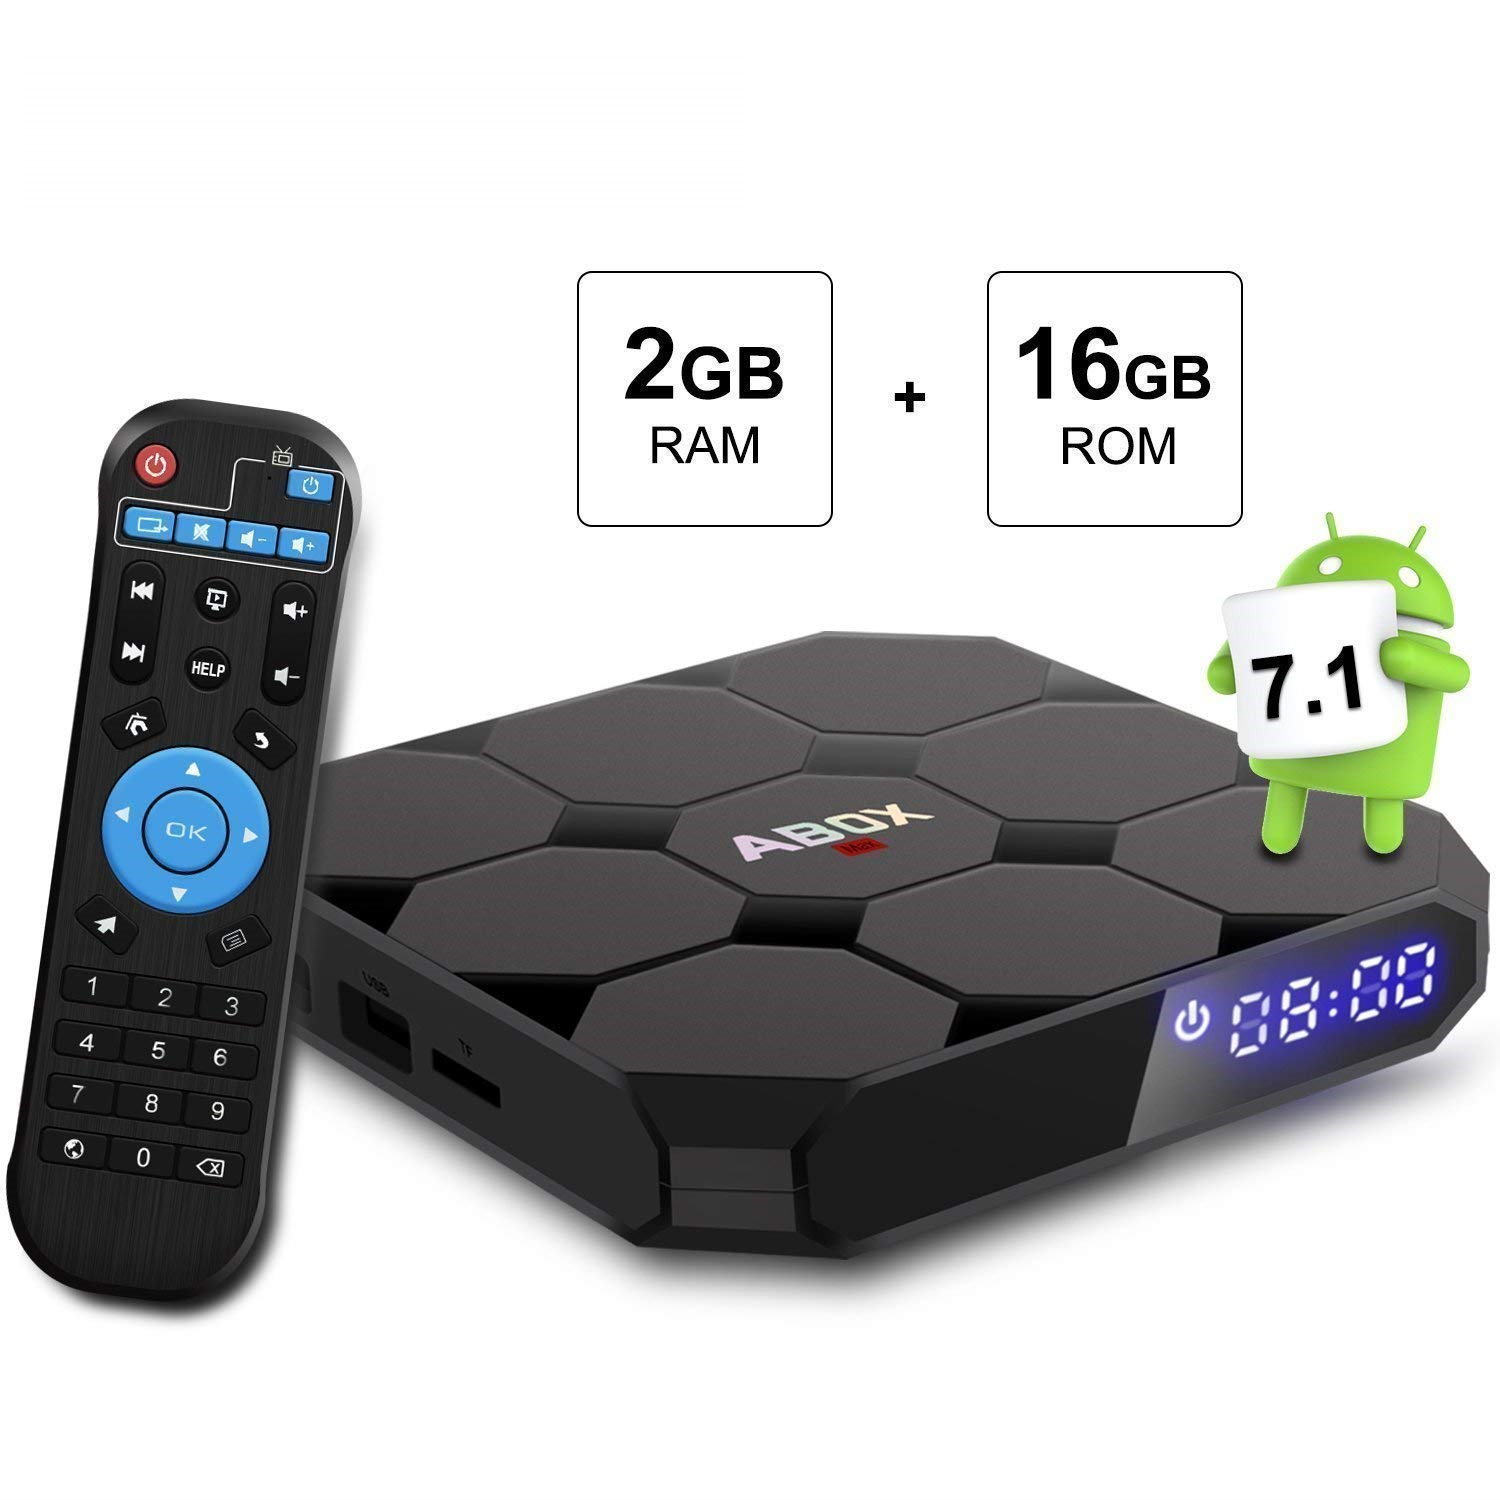 Android 7.1 TV Box solo 28,9€